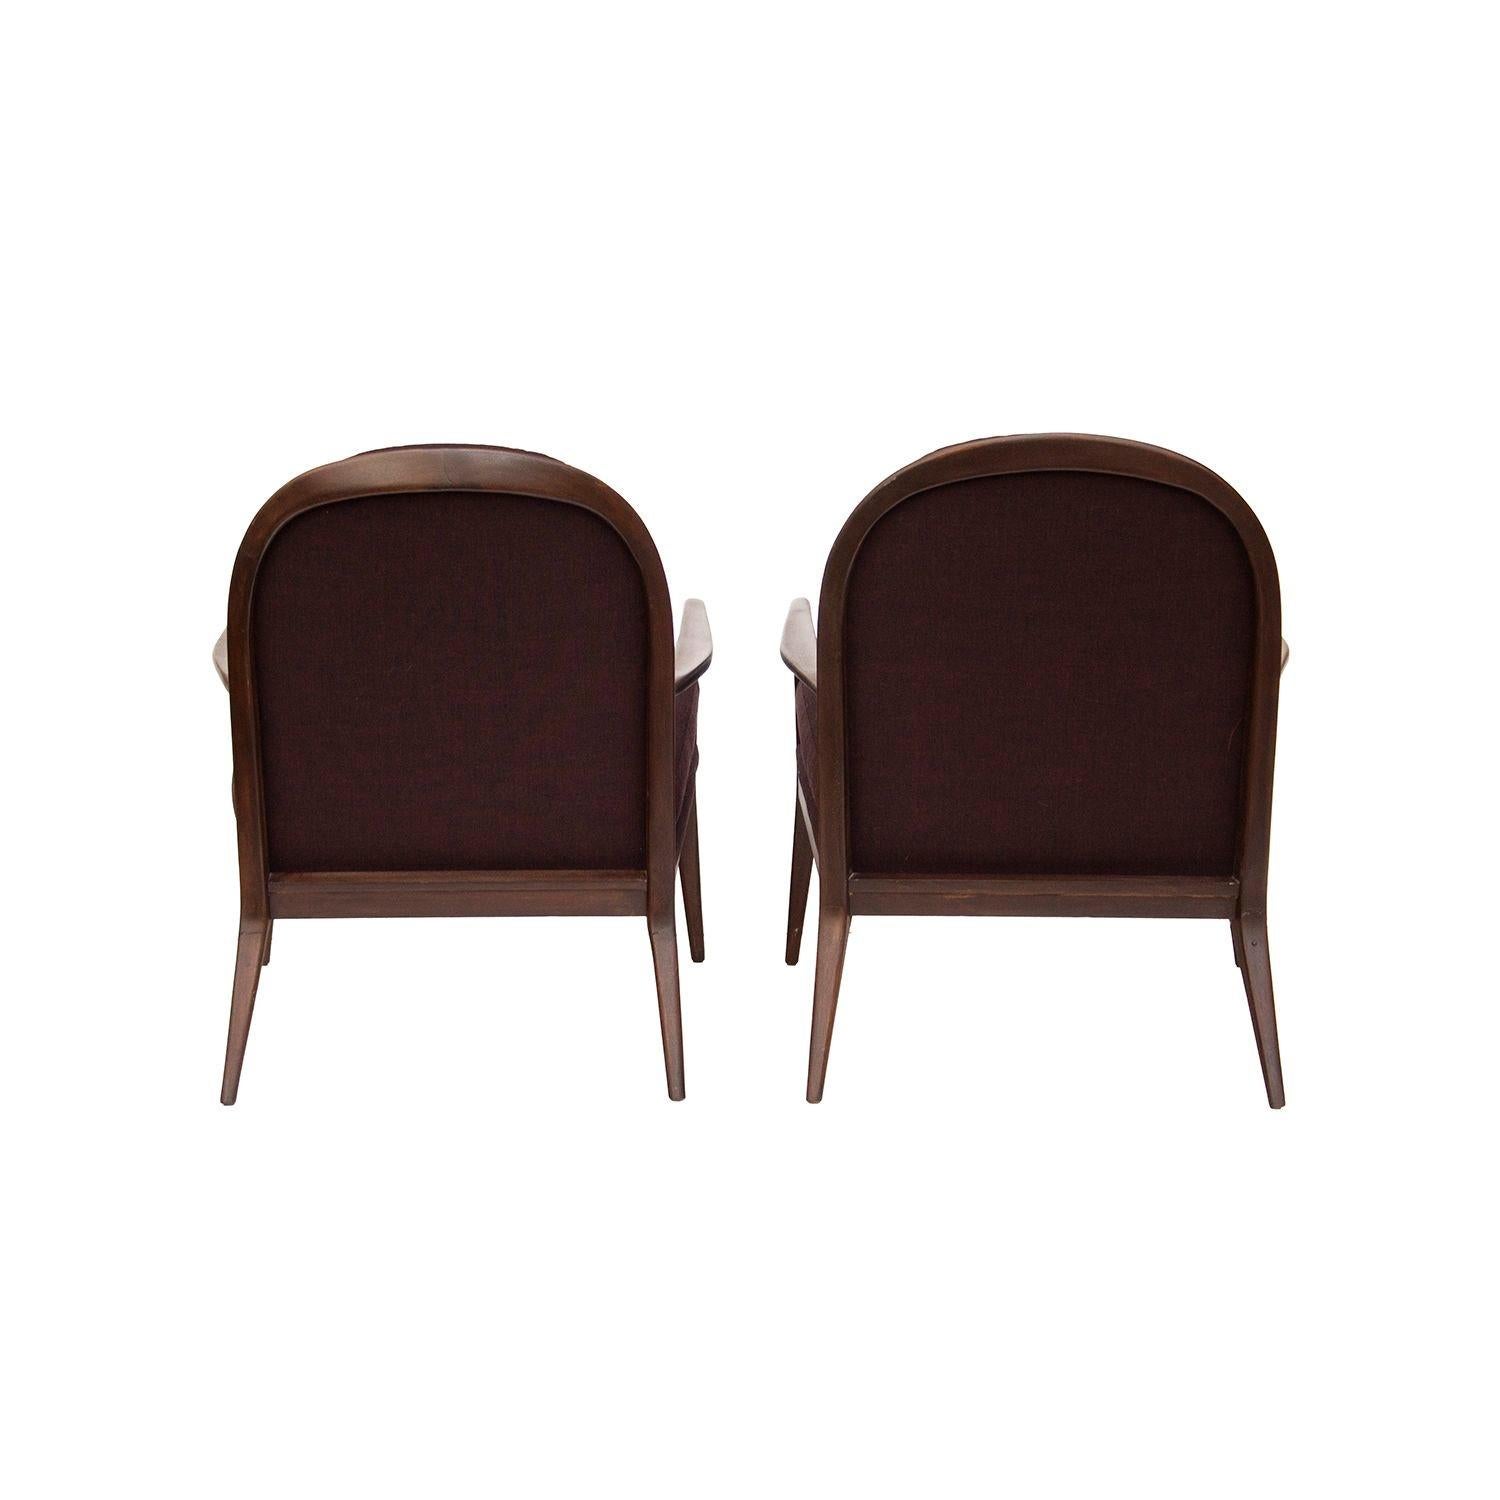 Mid-20th Century Paul McCobb for Widdicomb Walnut Armchairs, Newly upholstered For Sale